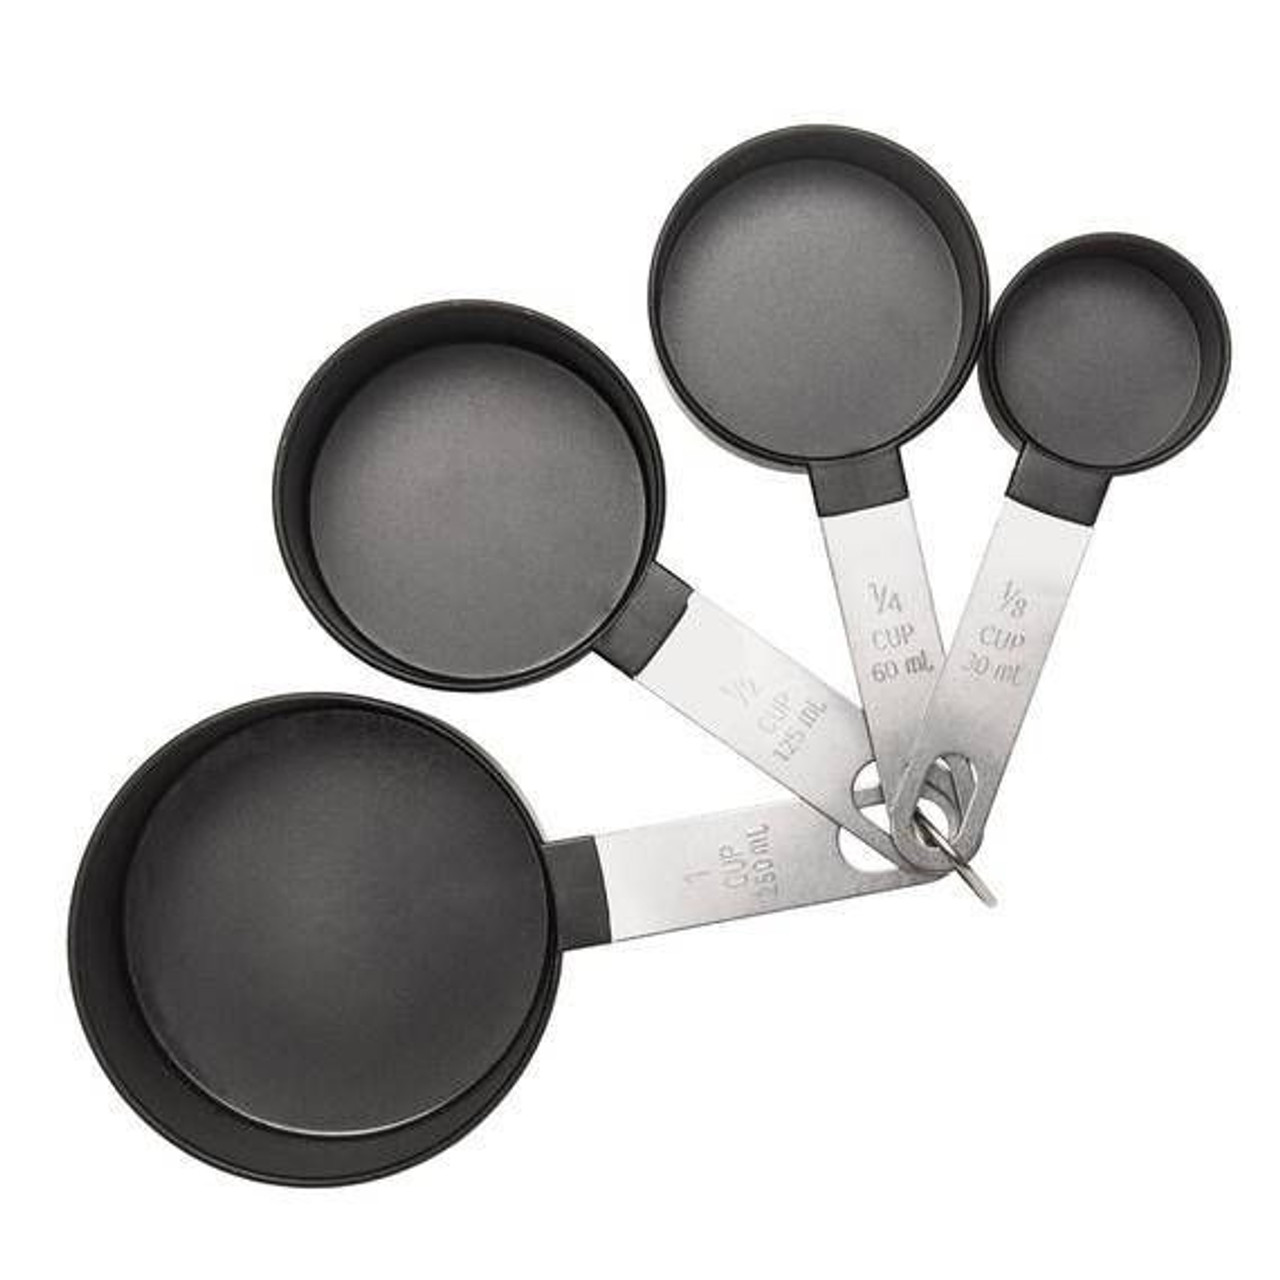 https://cdn11.bigcommerce.com/s-q0oajb576s/images/stencil/1280x1280/products/1234/3472/4-piece-measuring-cup-sets-stainless-steel-with-black-handles-11__84670.1637184254.jpg?c=1